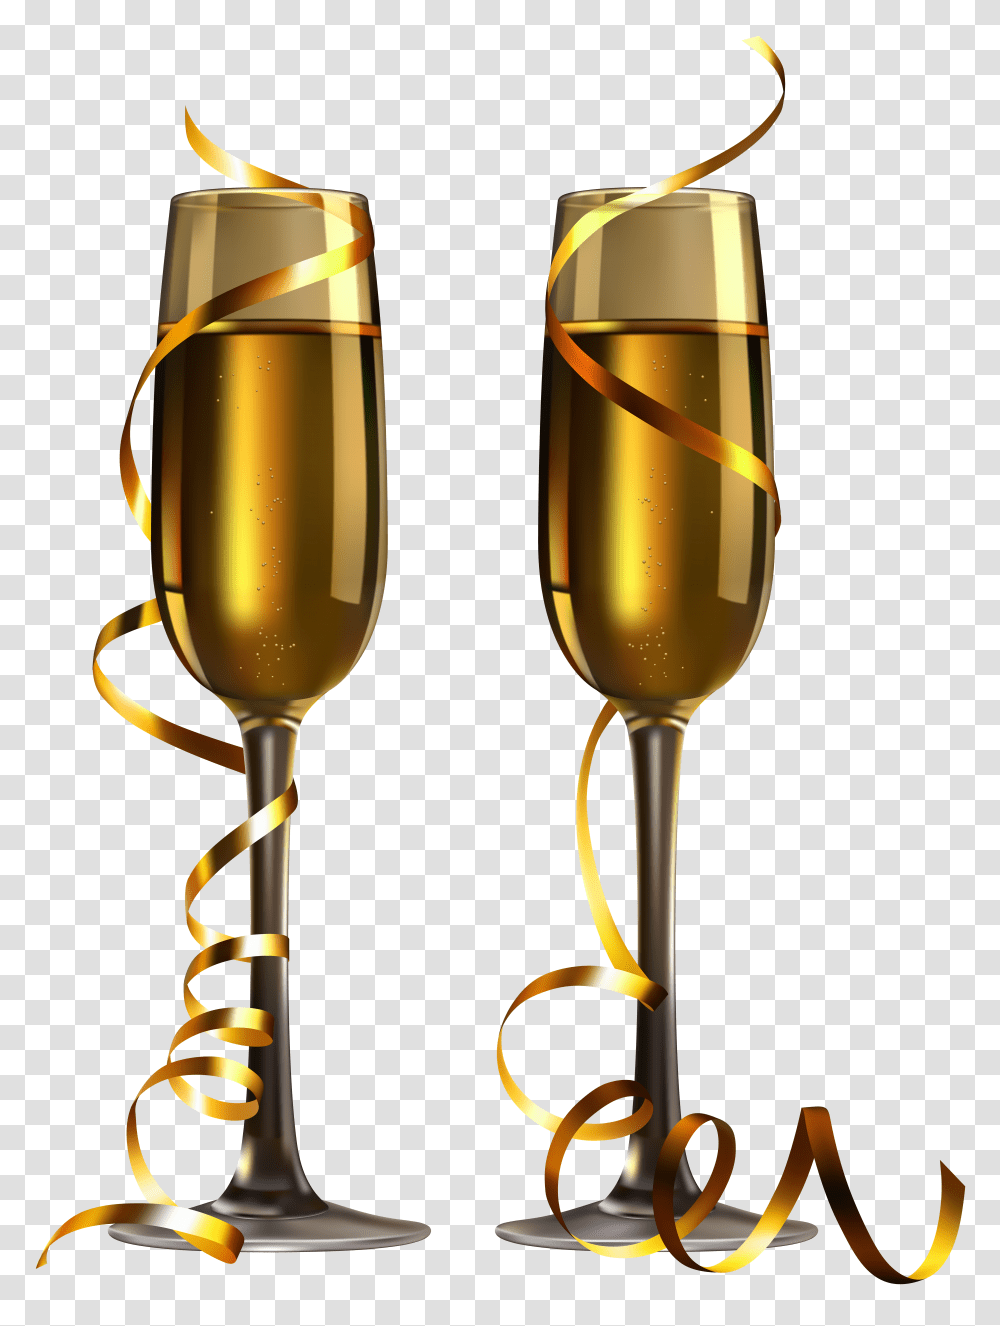 New Year Champagne Glasses Transparent Png